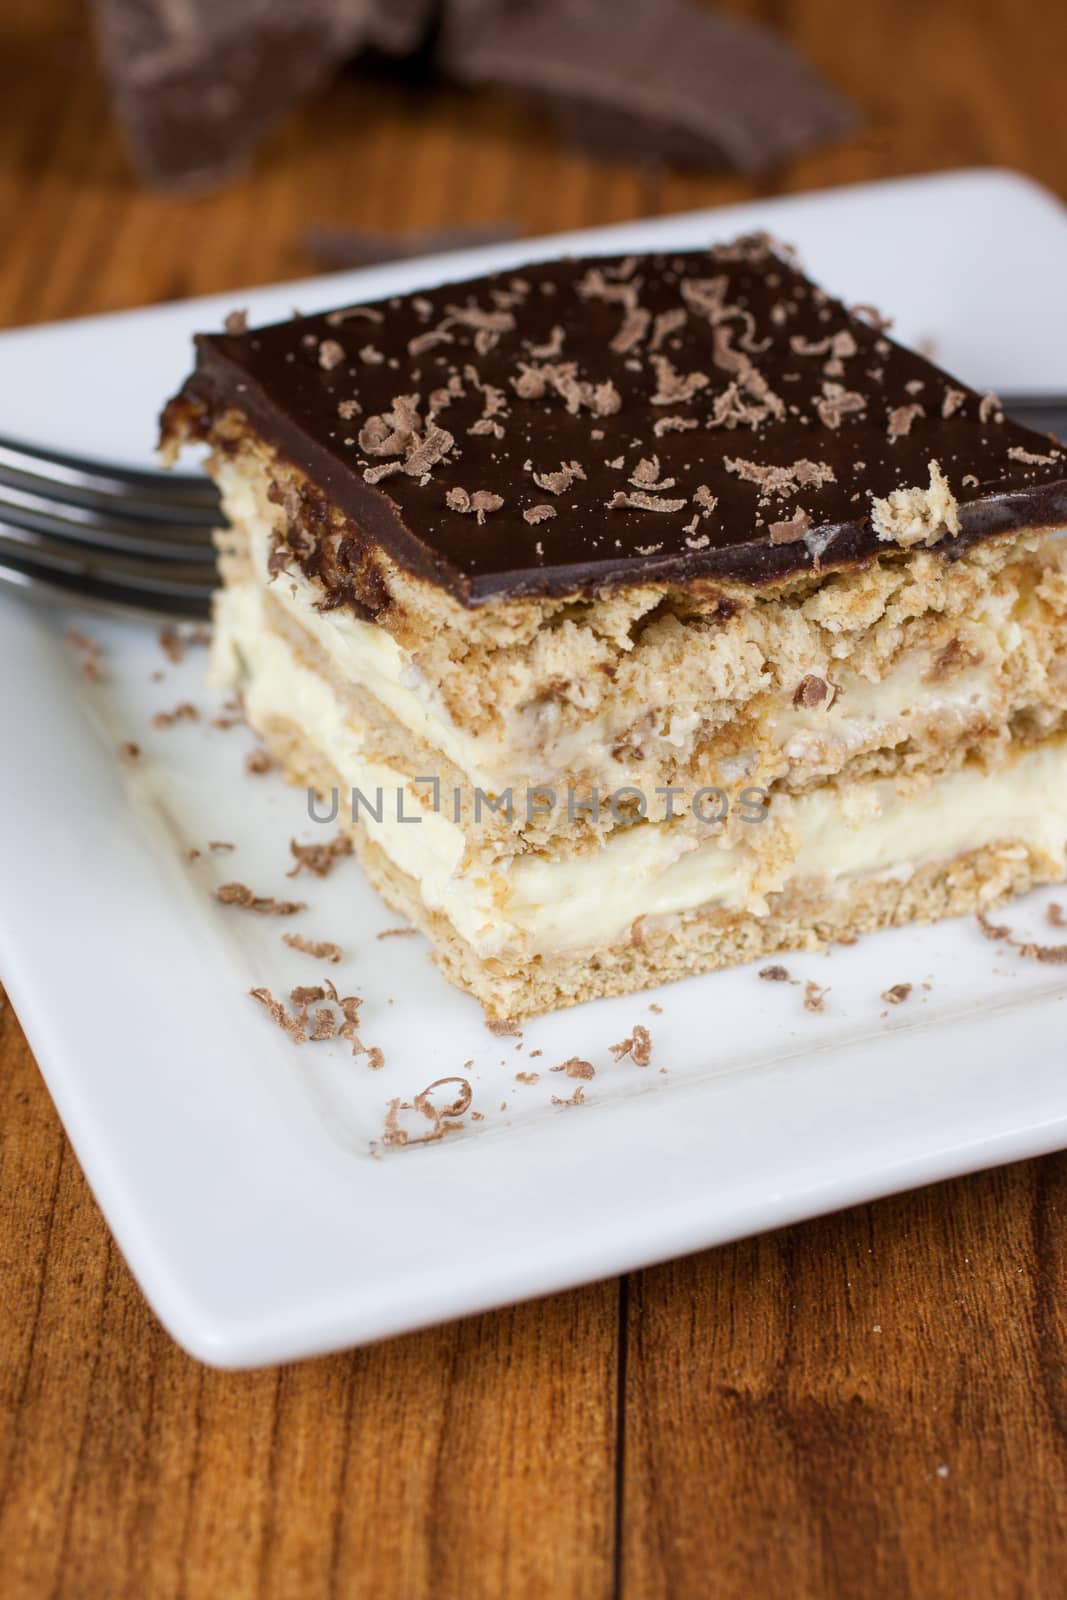 A layered Boston creme pie style dessert made with french vanilla filling and chocolate ganache topping.